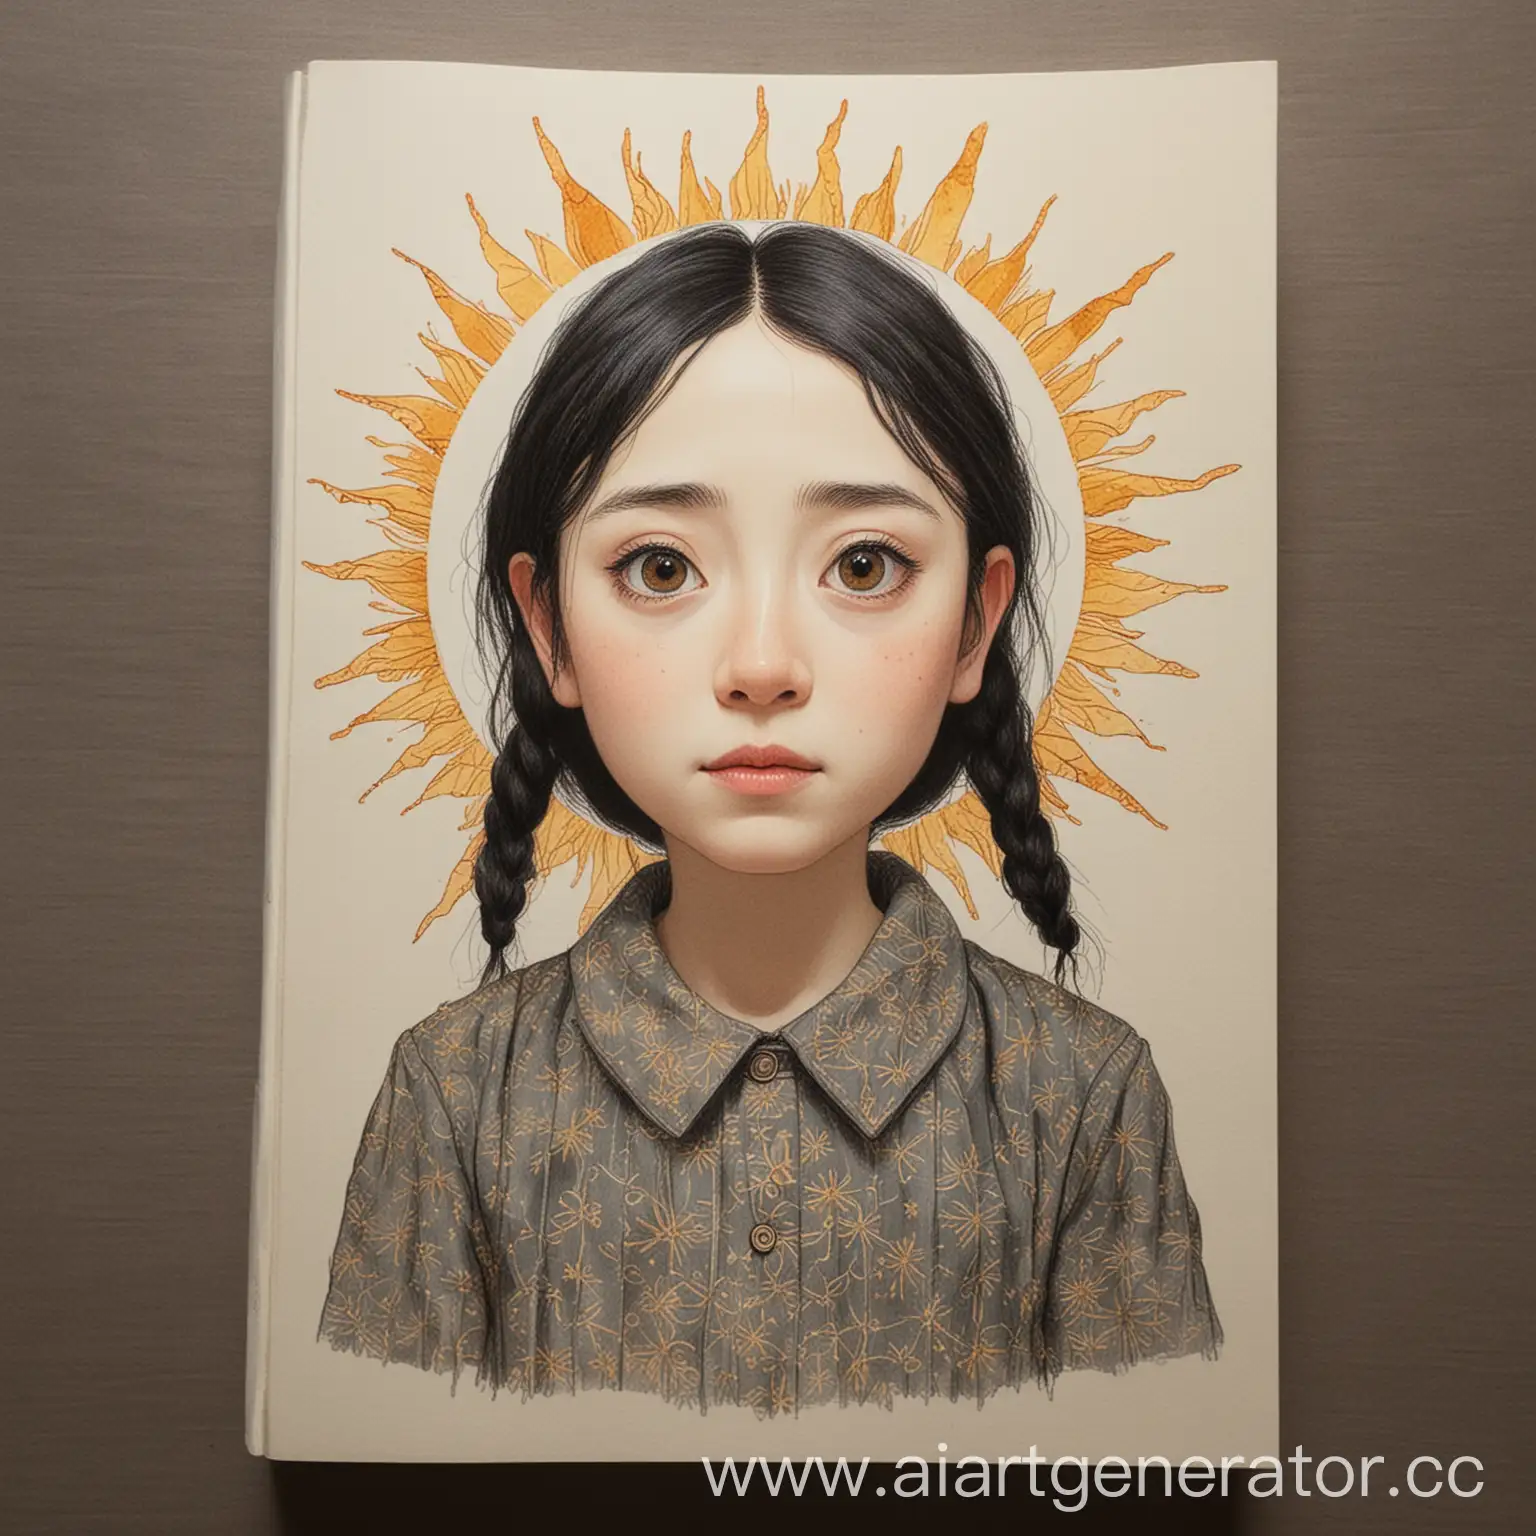 Draw an art book based on the work of "Clara and the sun" by kazuo ishiguro